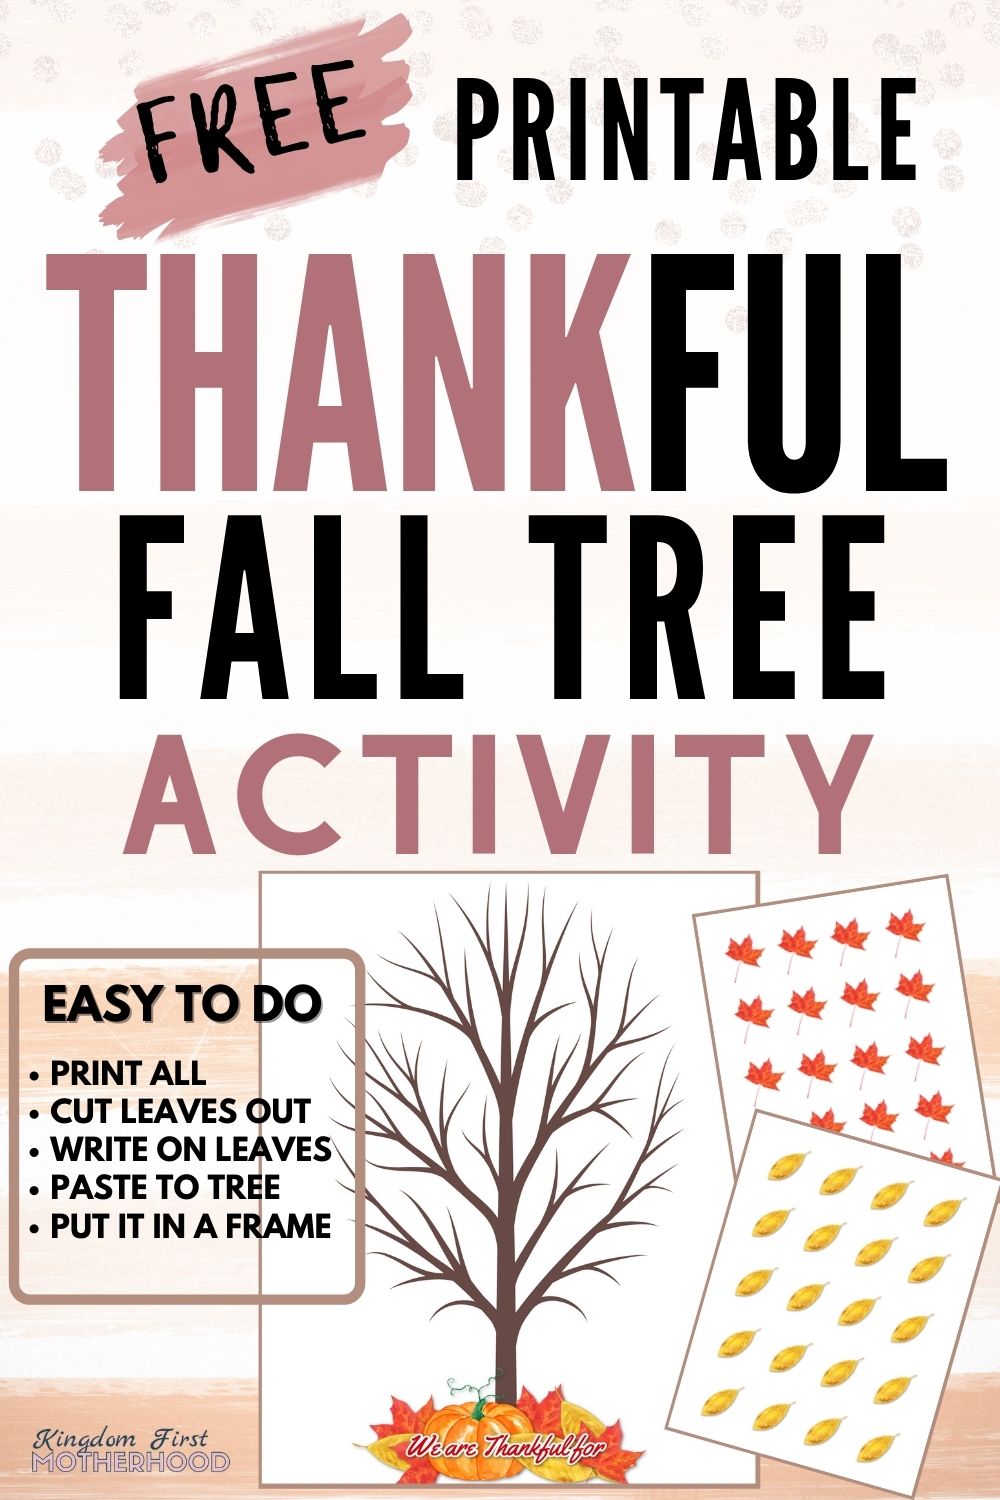 Download this Free Printable Thankful Tree Activity to do with your kids this Thanksgiving. Enjoy the time counting your blessings, writing them down on the leaves and glueing them to the tree.